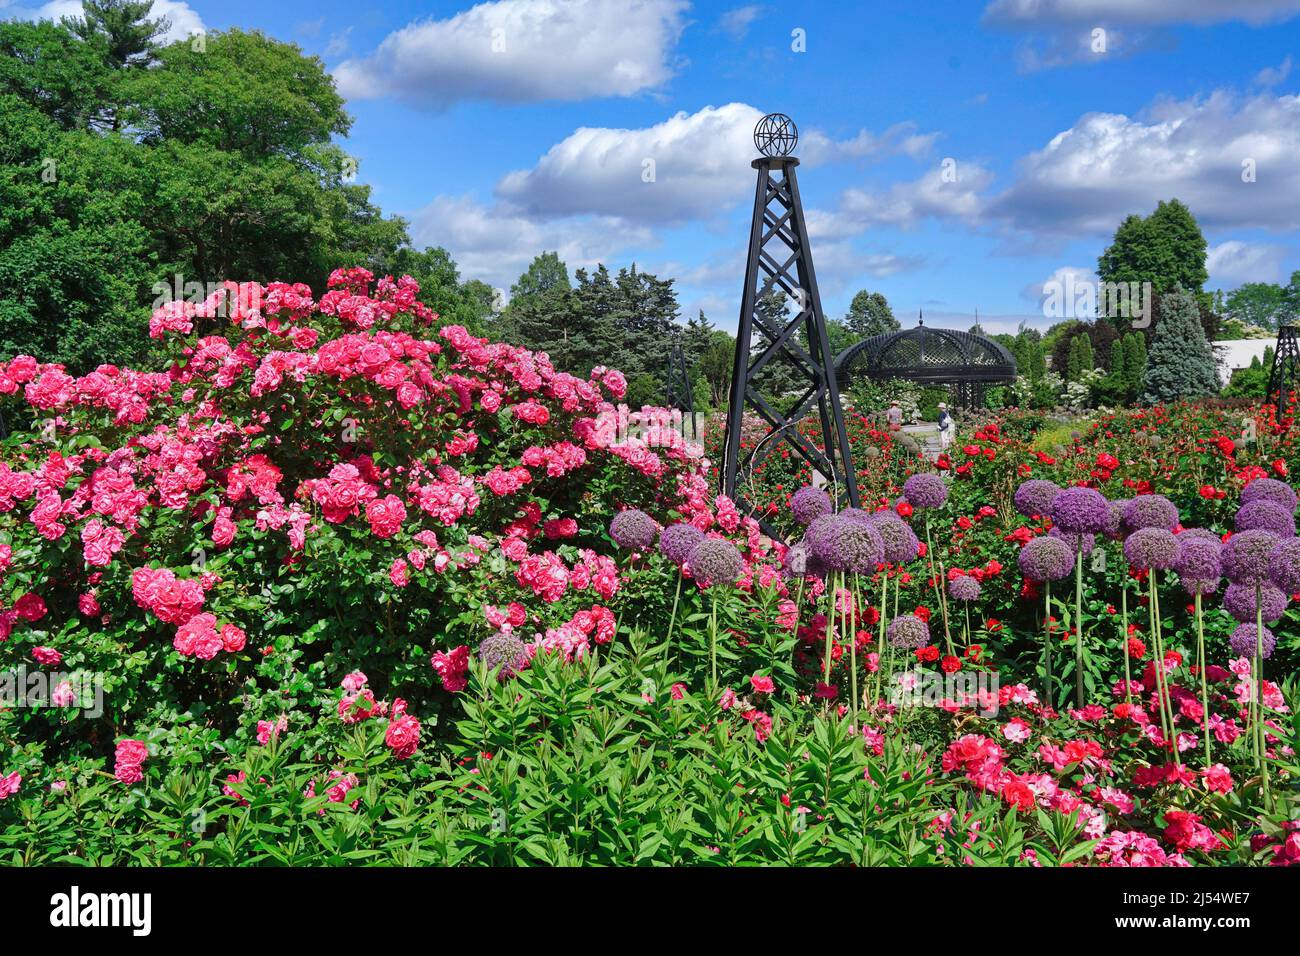 Brilliant pink and red roses blooming in the rose garden at the Royal Botanical Gardens in Hamilton, Ontario, Canada Stock Photo